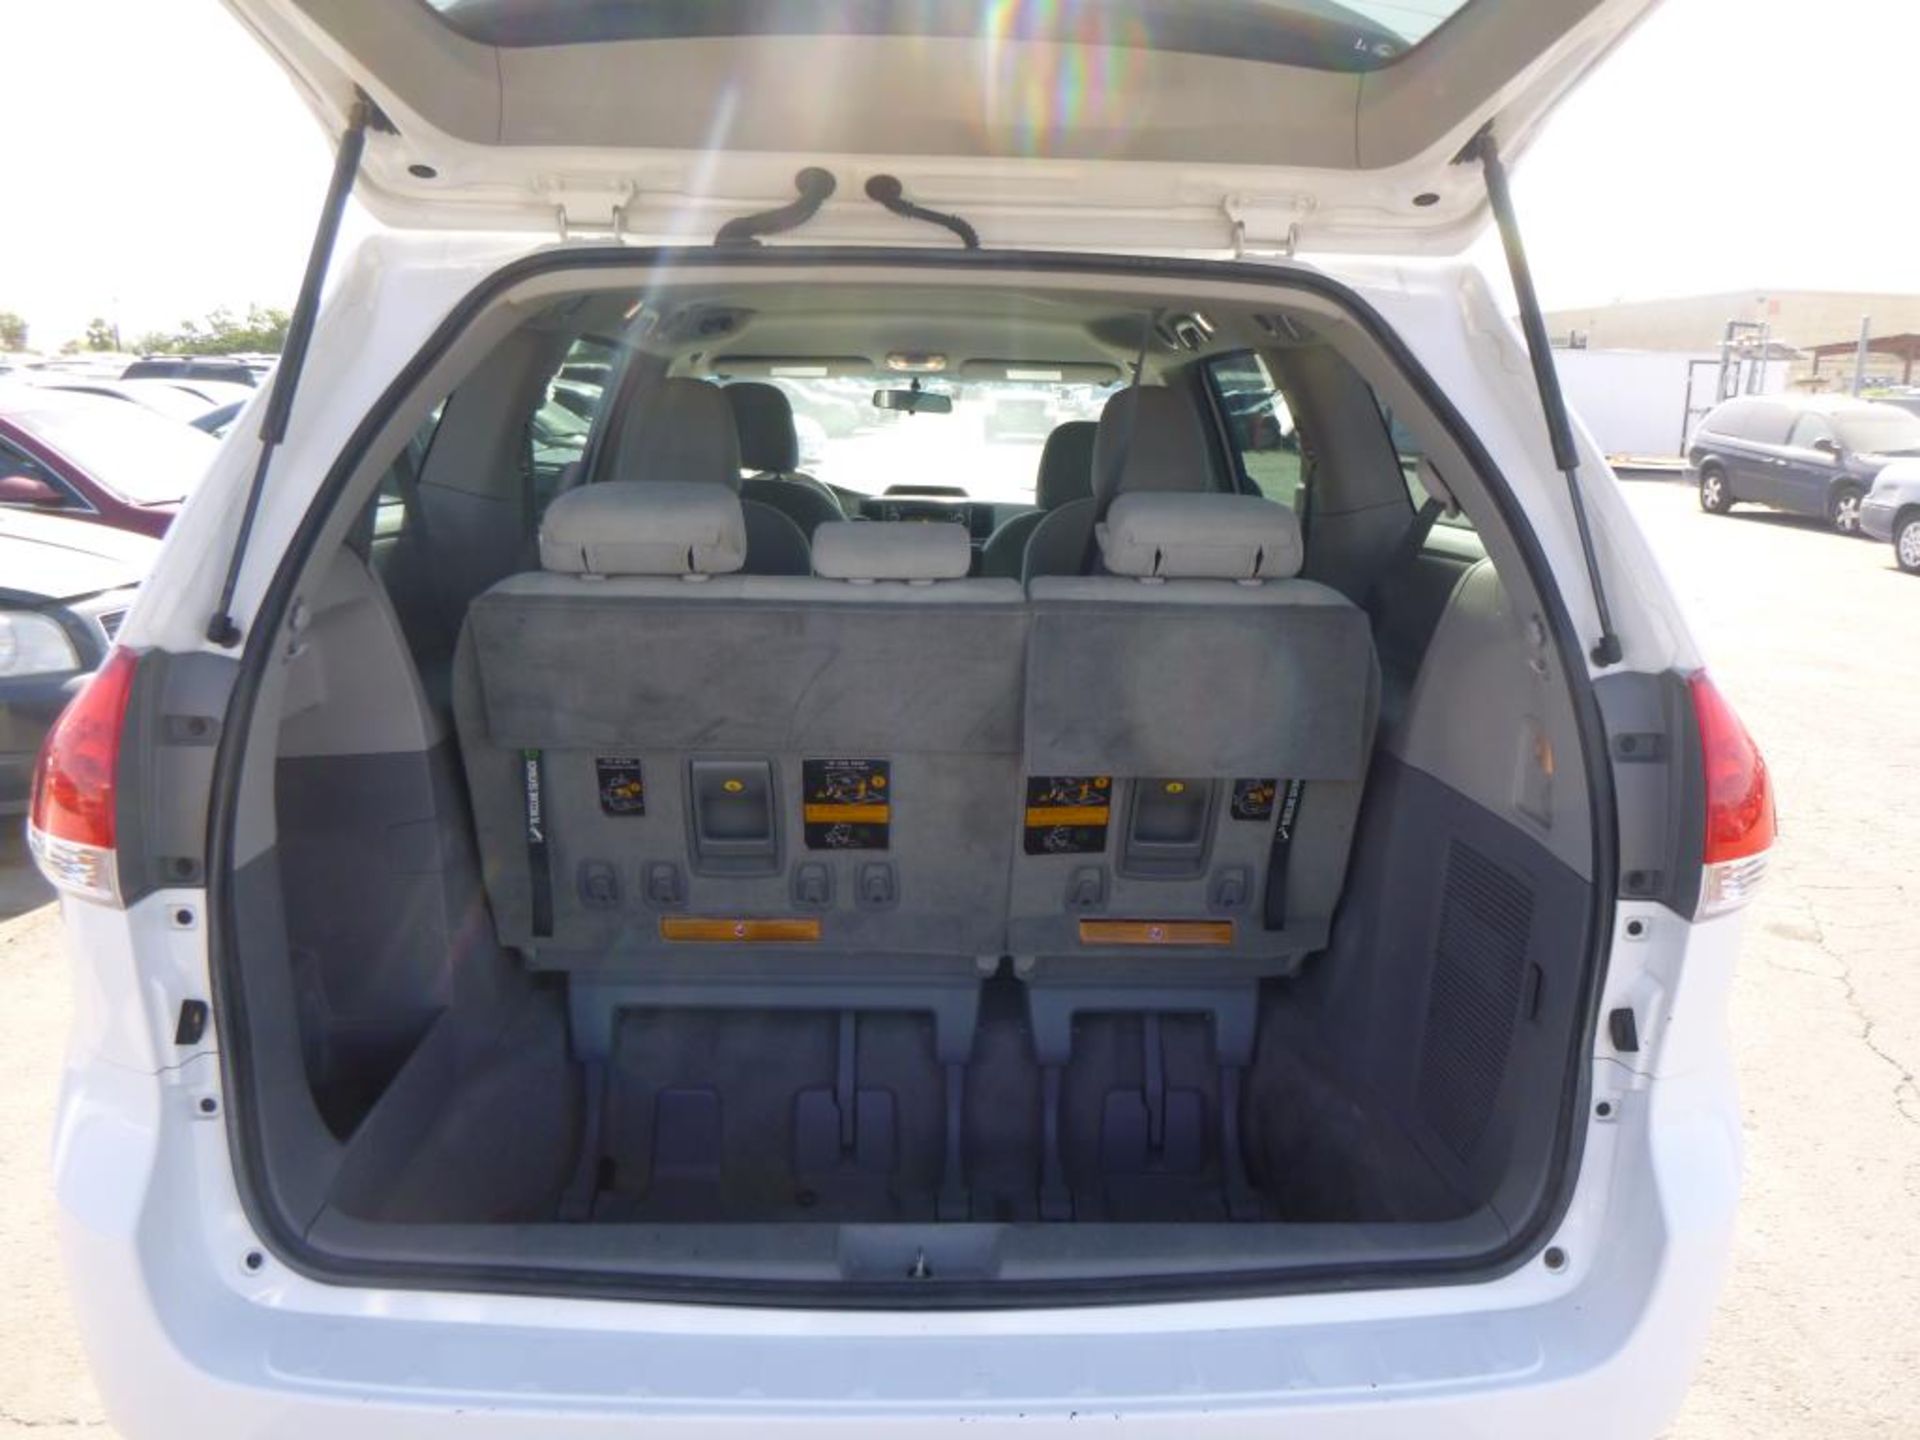 (Lot # 3355) 2012 Toyota Sienna - Image 7 of 16